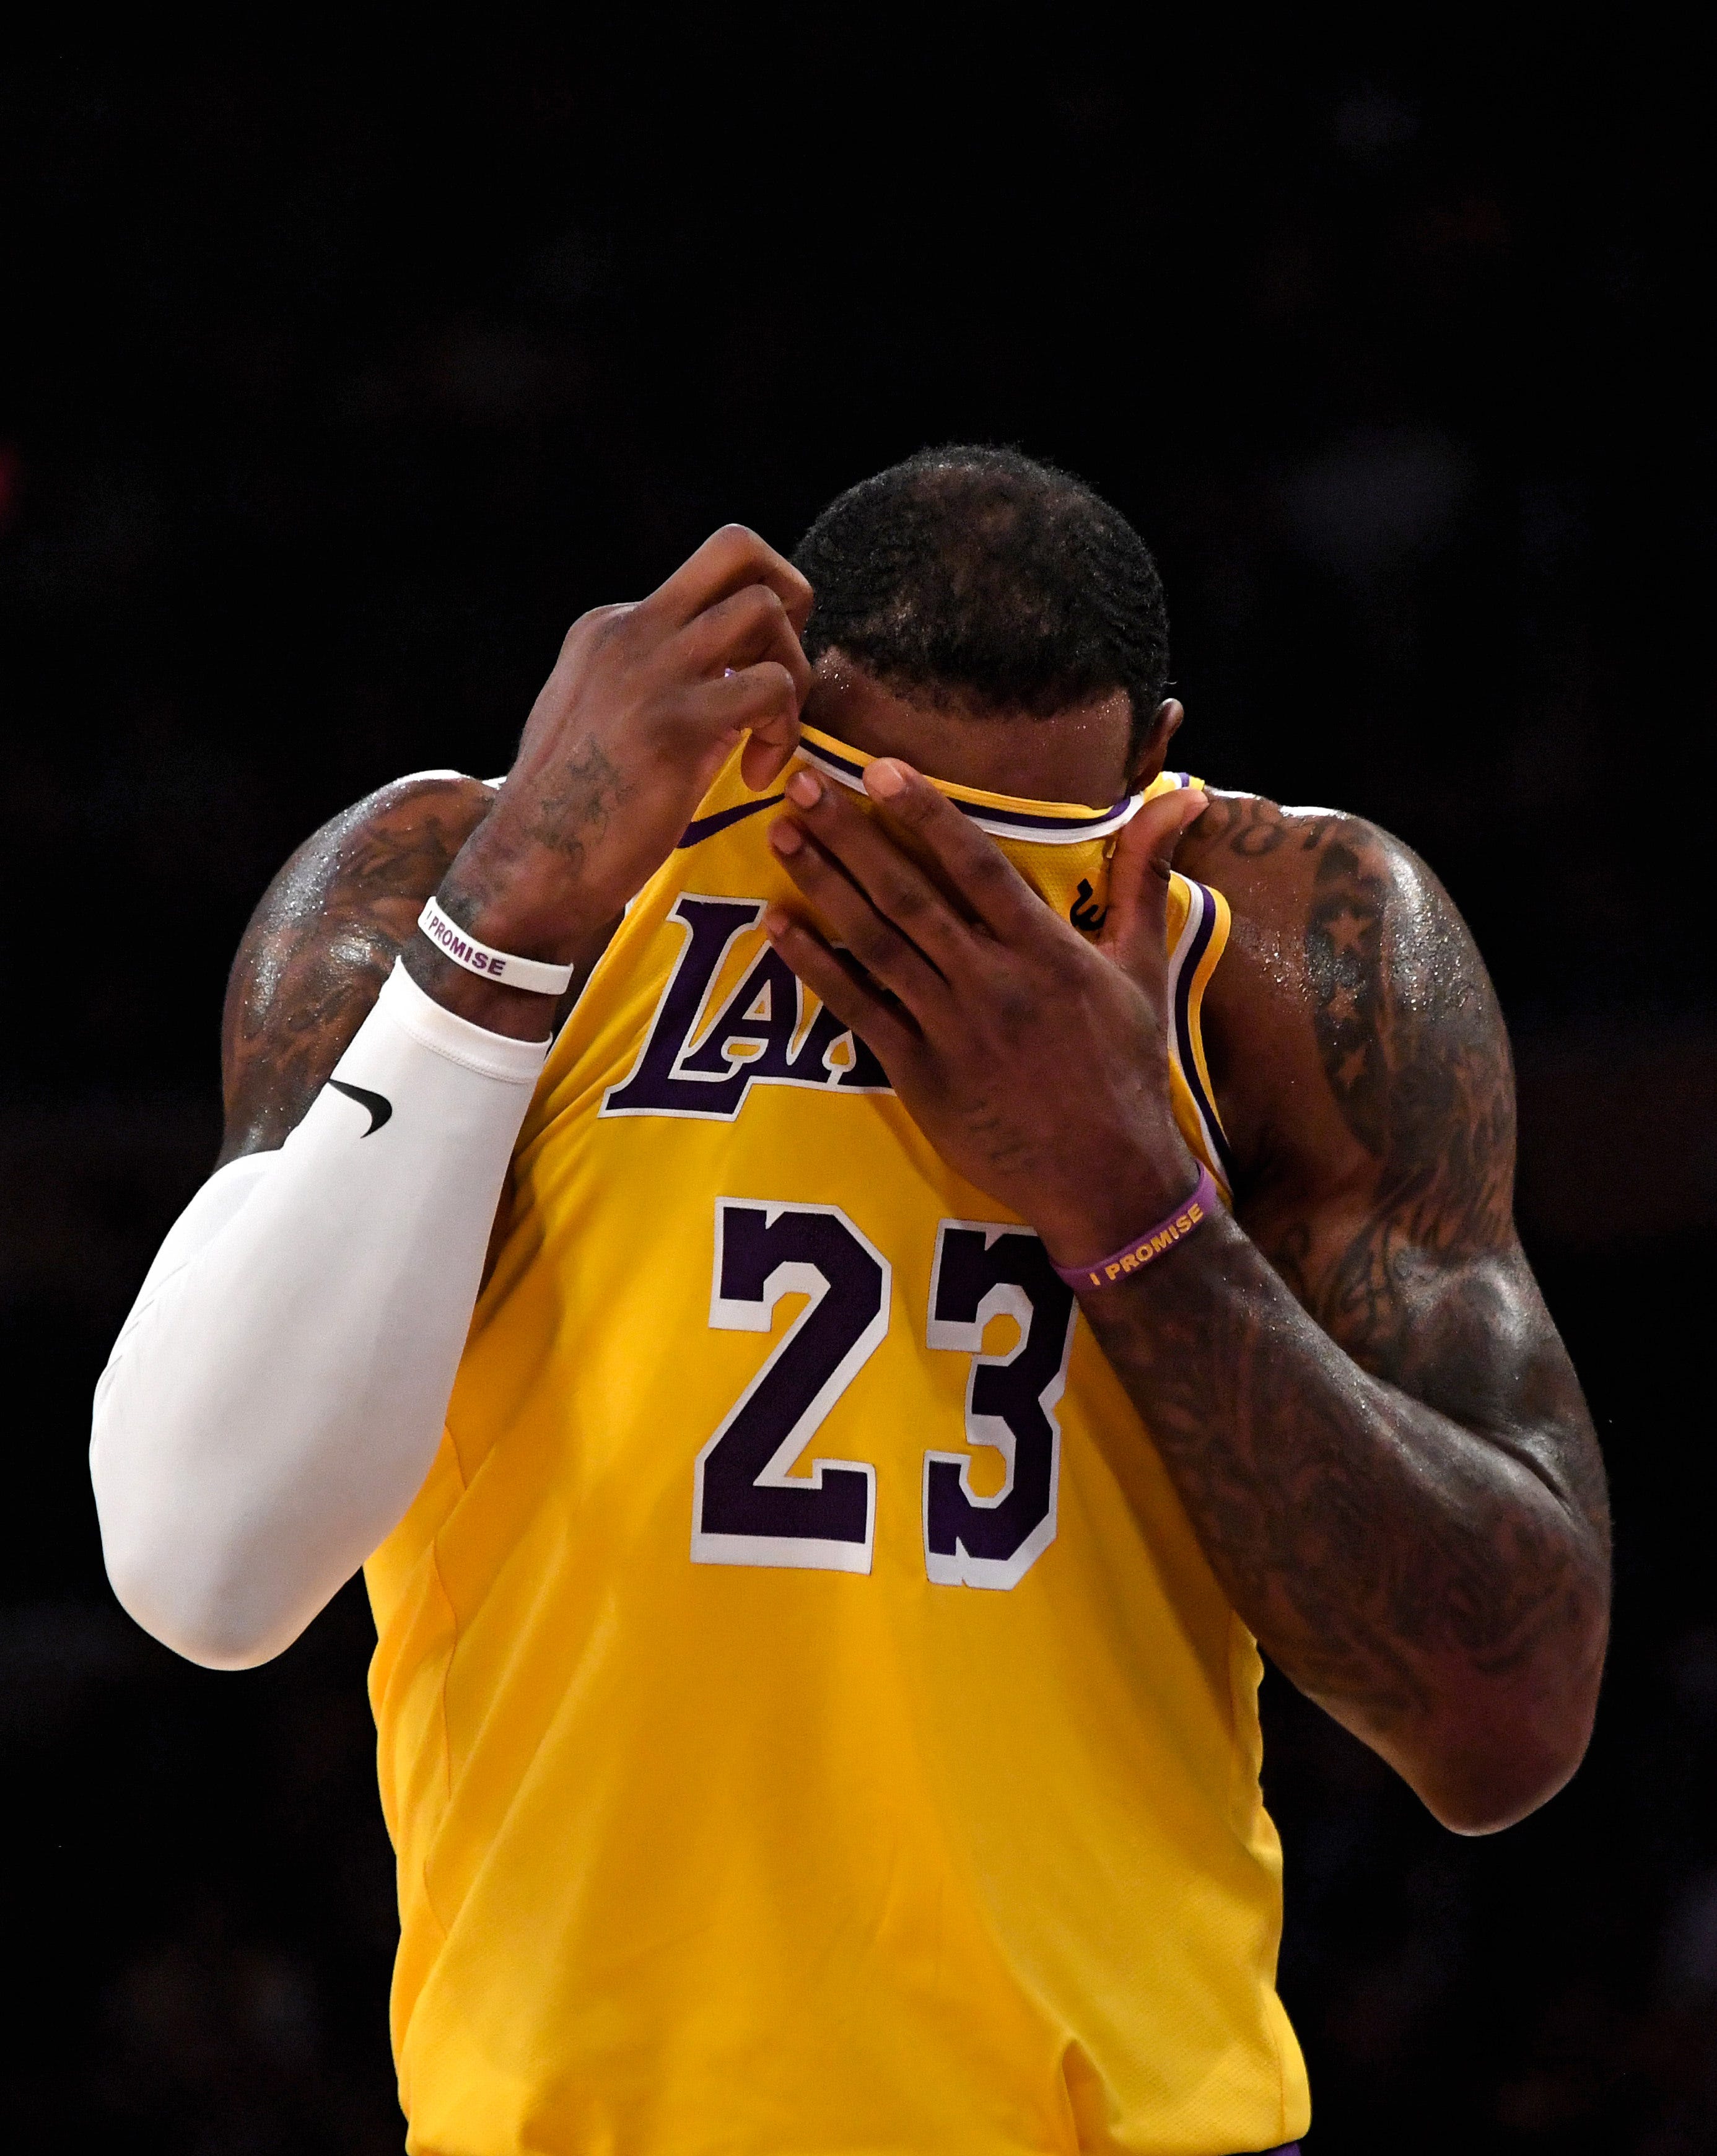 lebron james trade to lakers